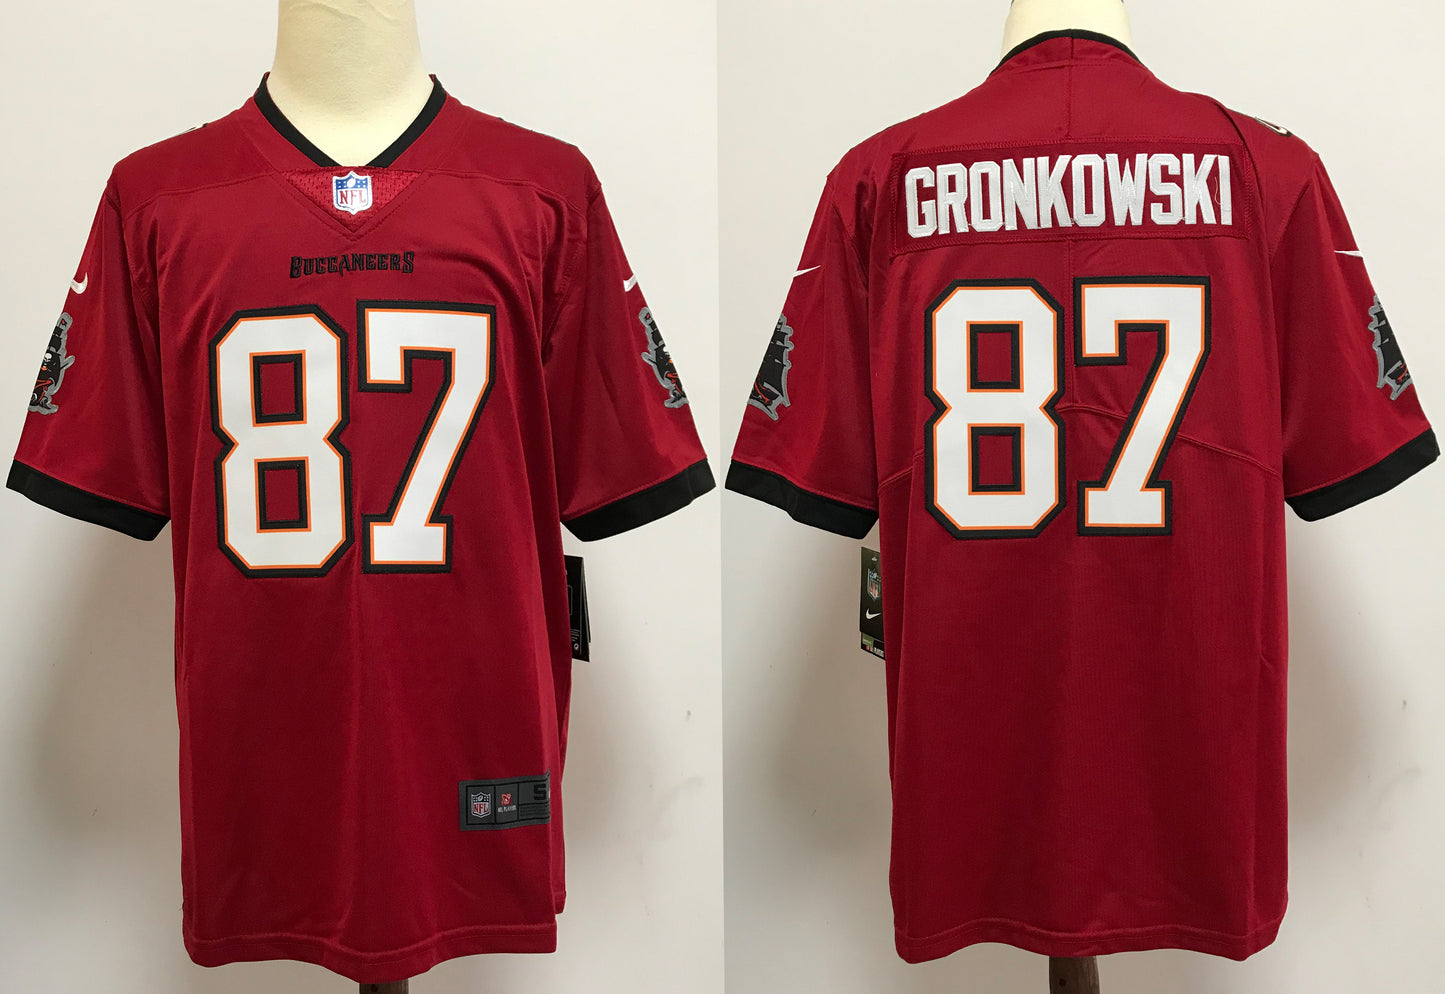 Rob Gronkowski Tampa Bay Buccaneers NFL Legends Nike Vapor Limited Home Jersey - Red